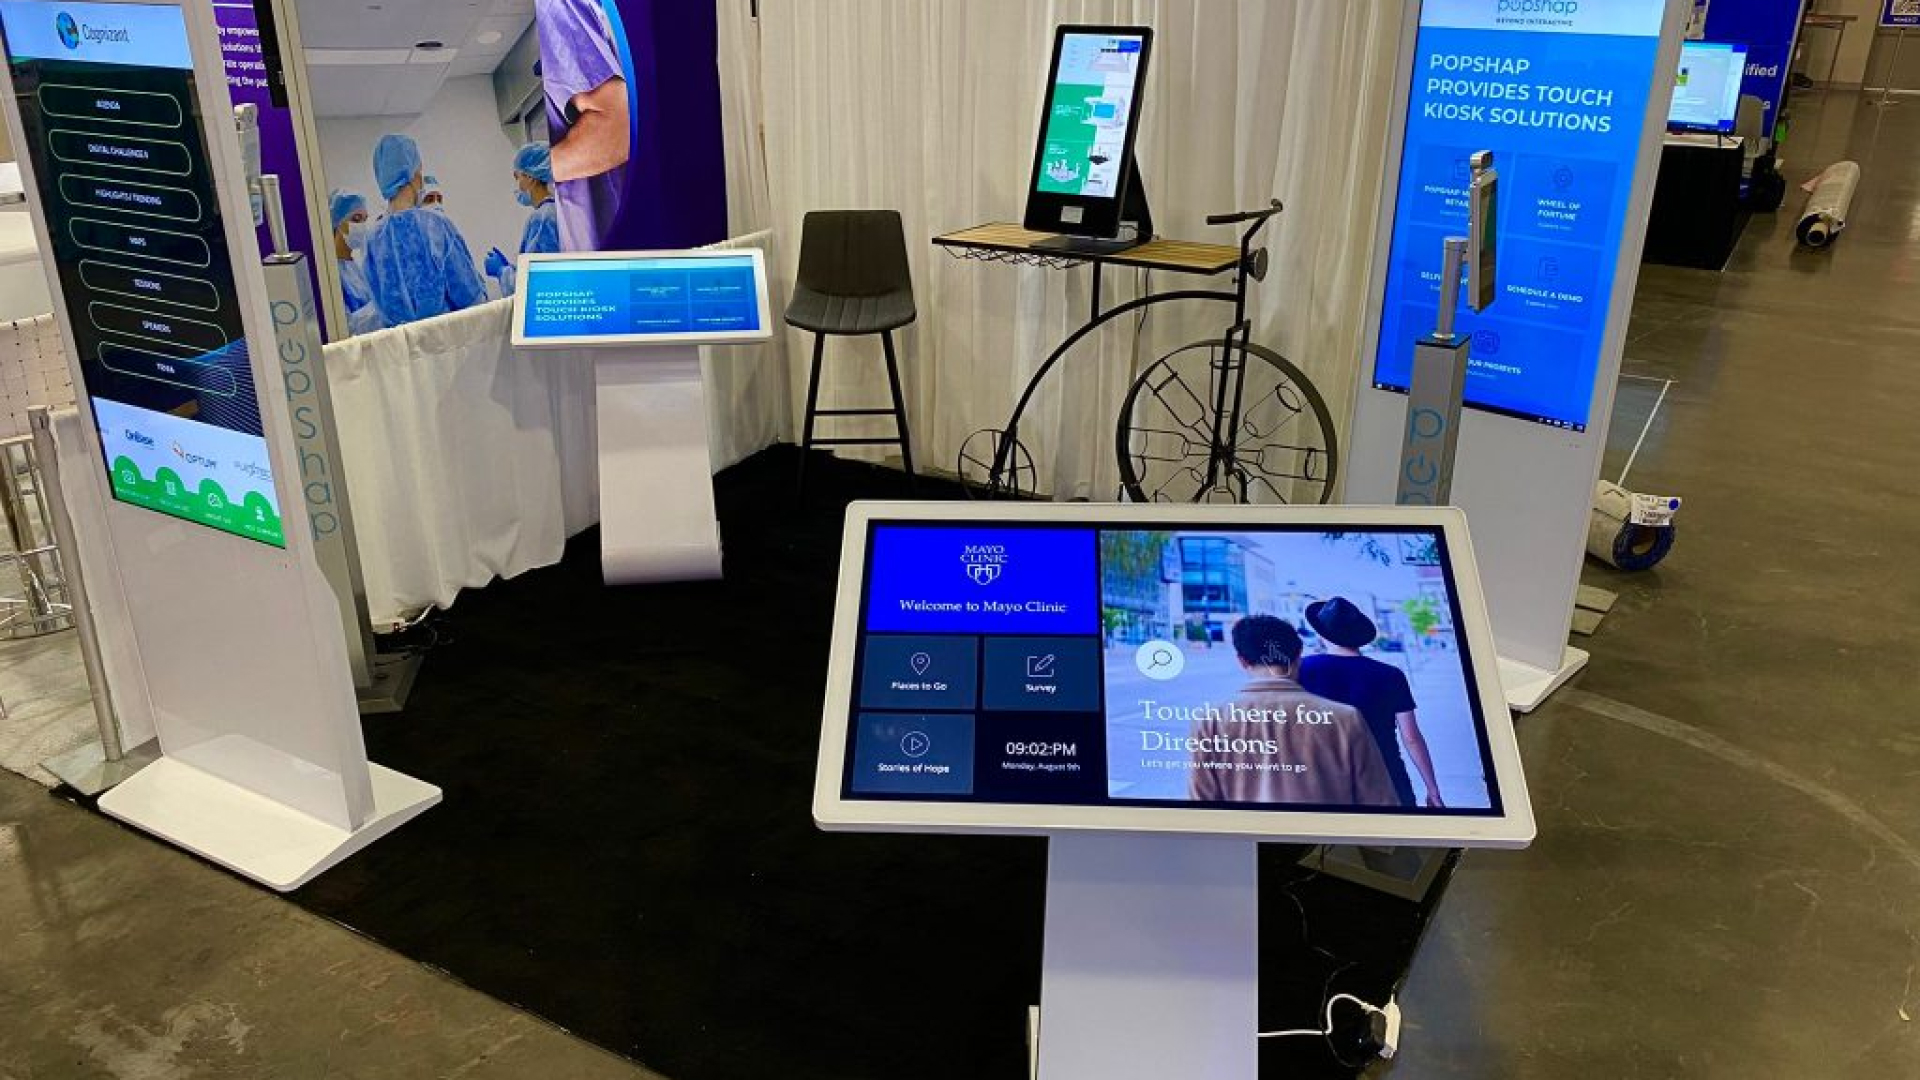 Digital display stall in a tradeshow.